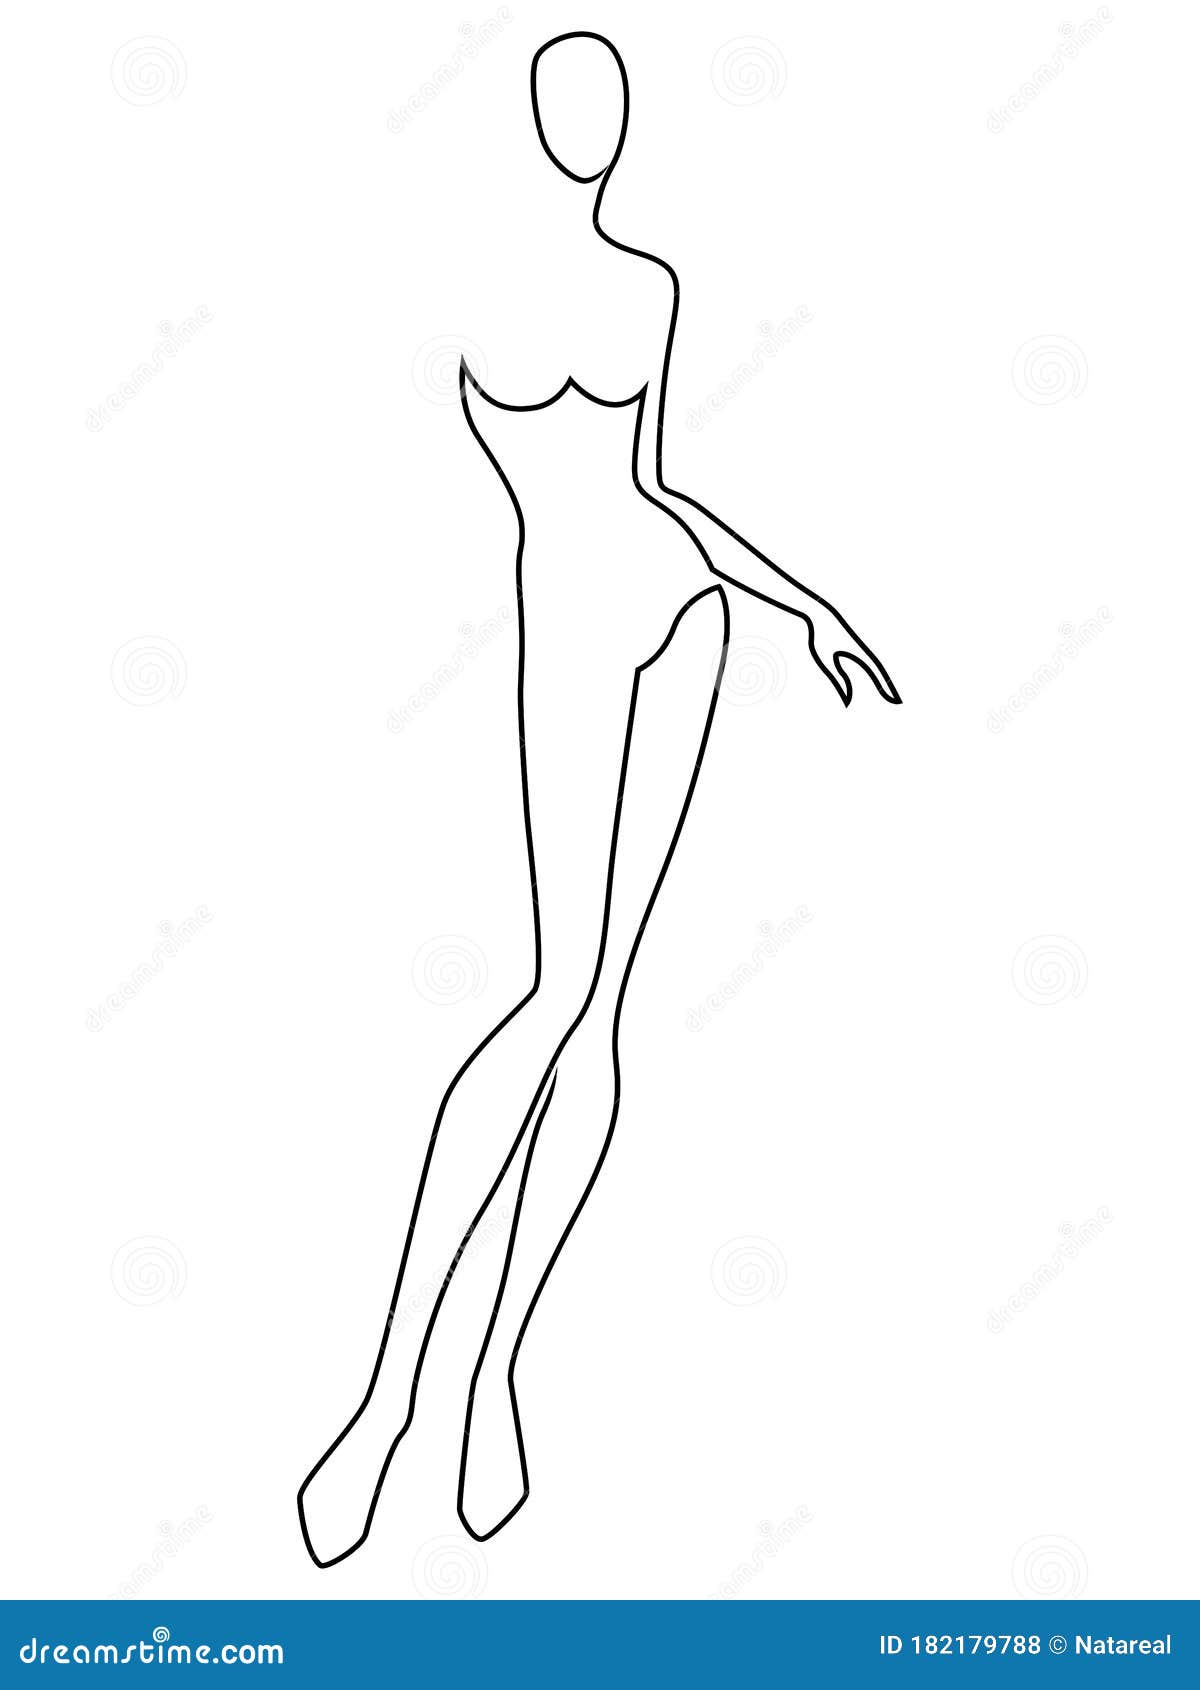 Outline of the woman body stock vector. Illustration of femininity